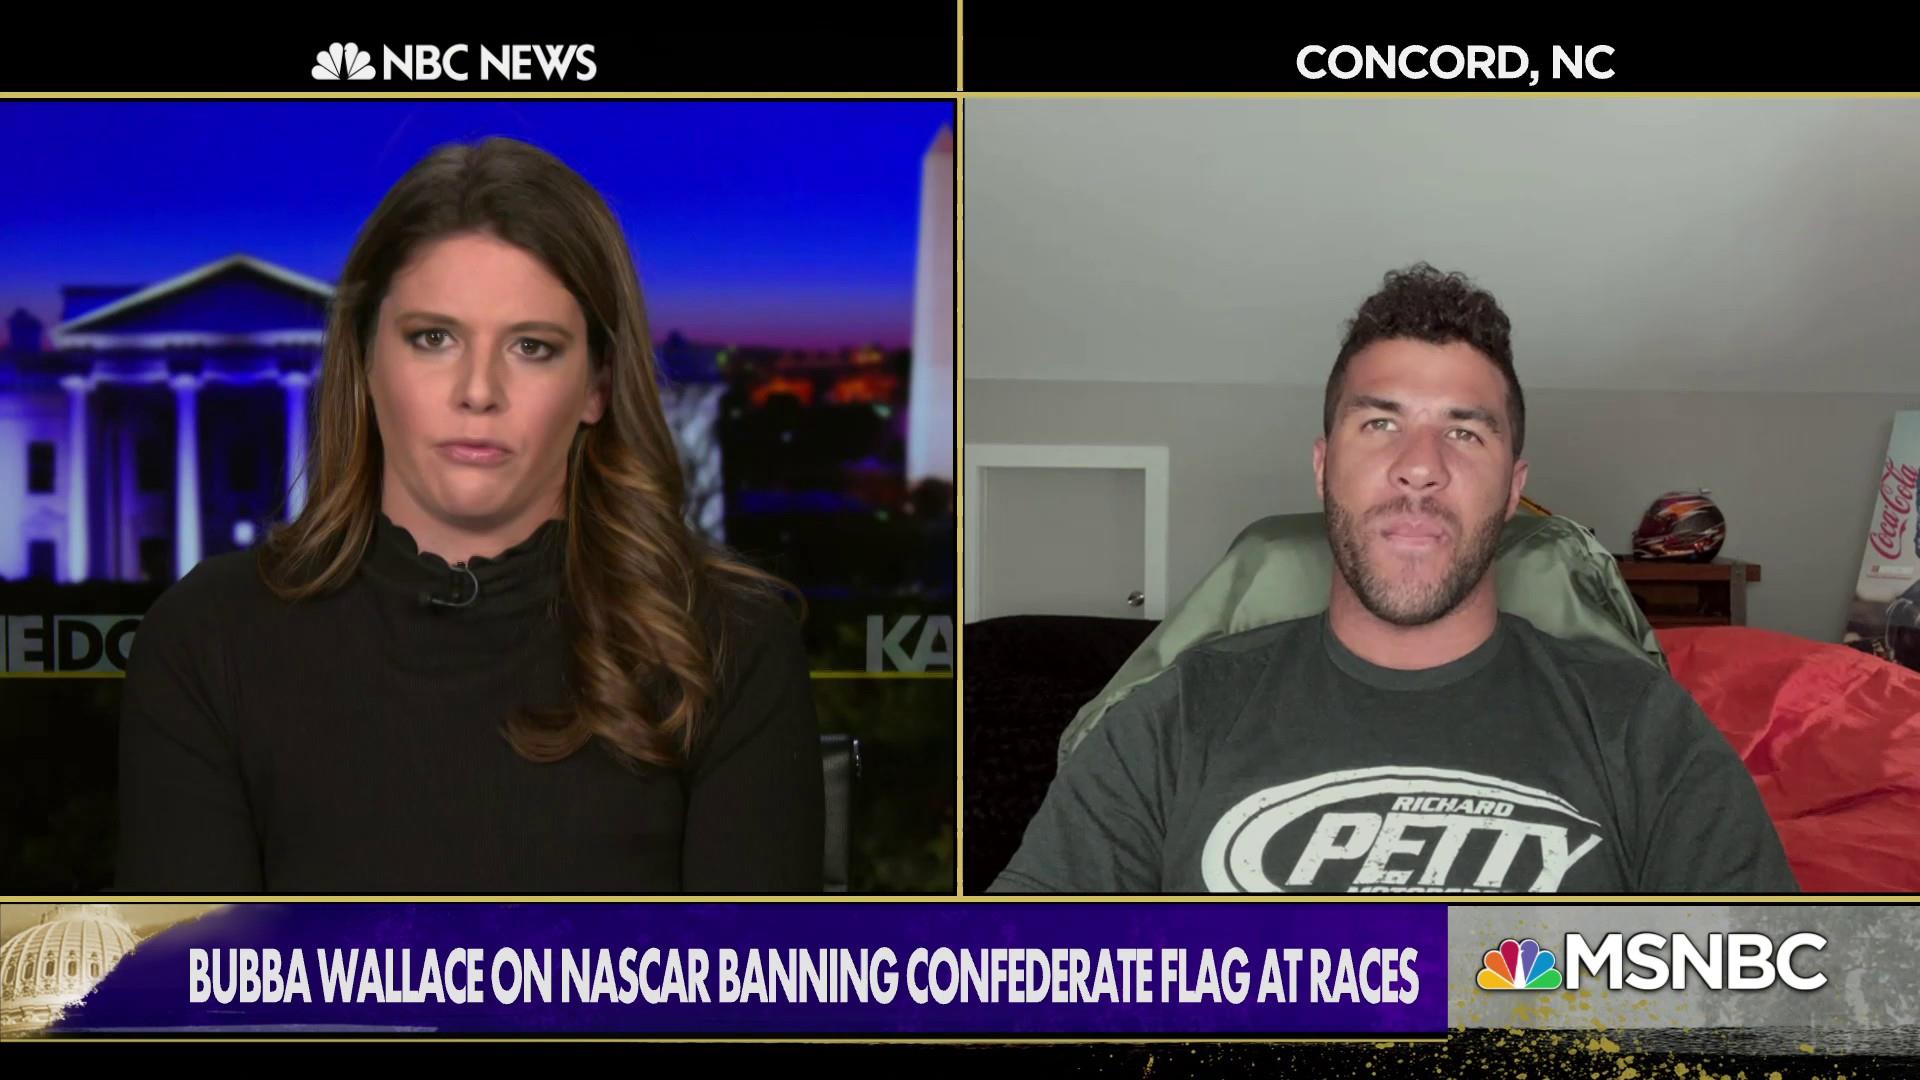 As racing resumes with fans, Bubba Wallace prods NASCAR to turn a corner with Confederate flag ban